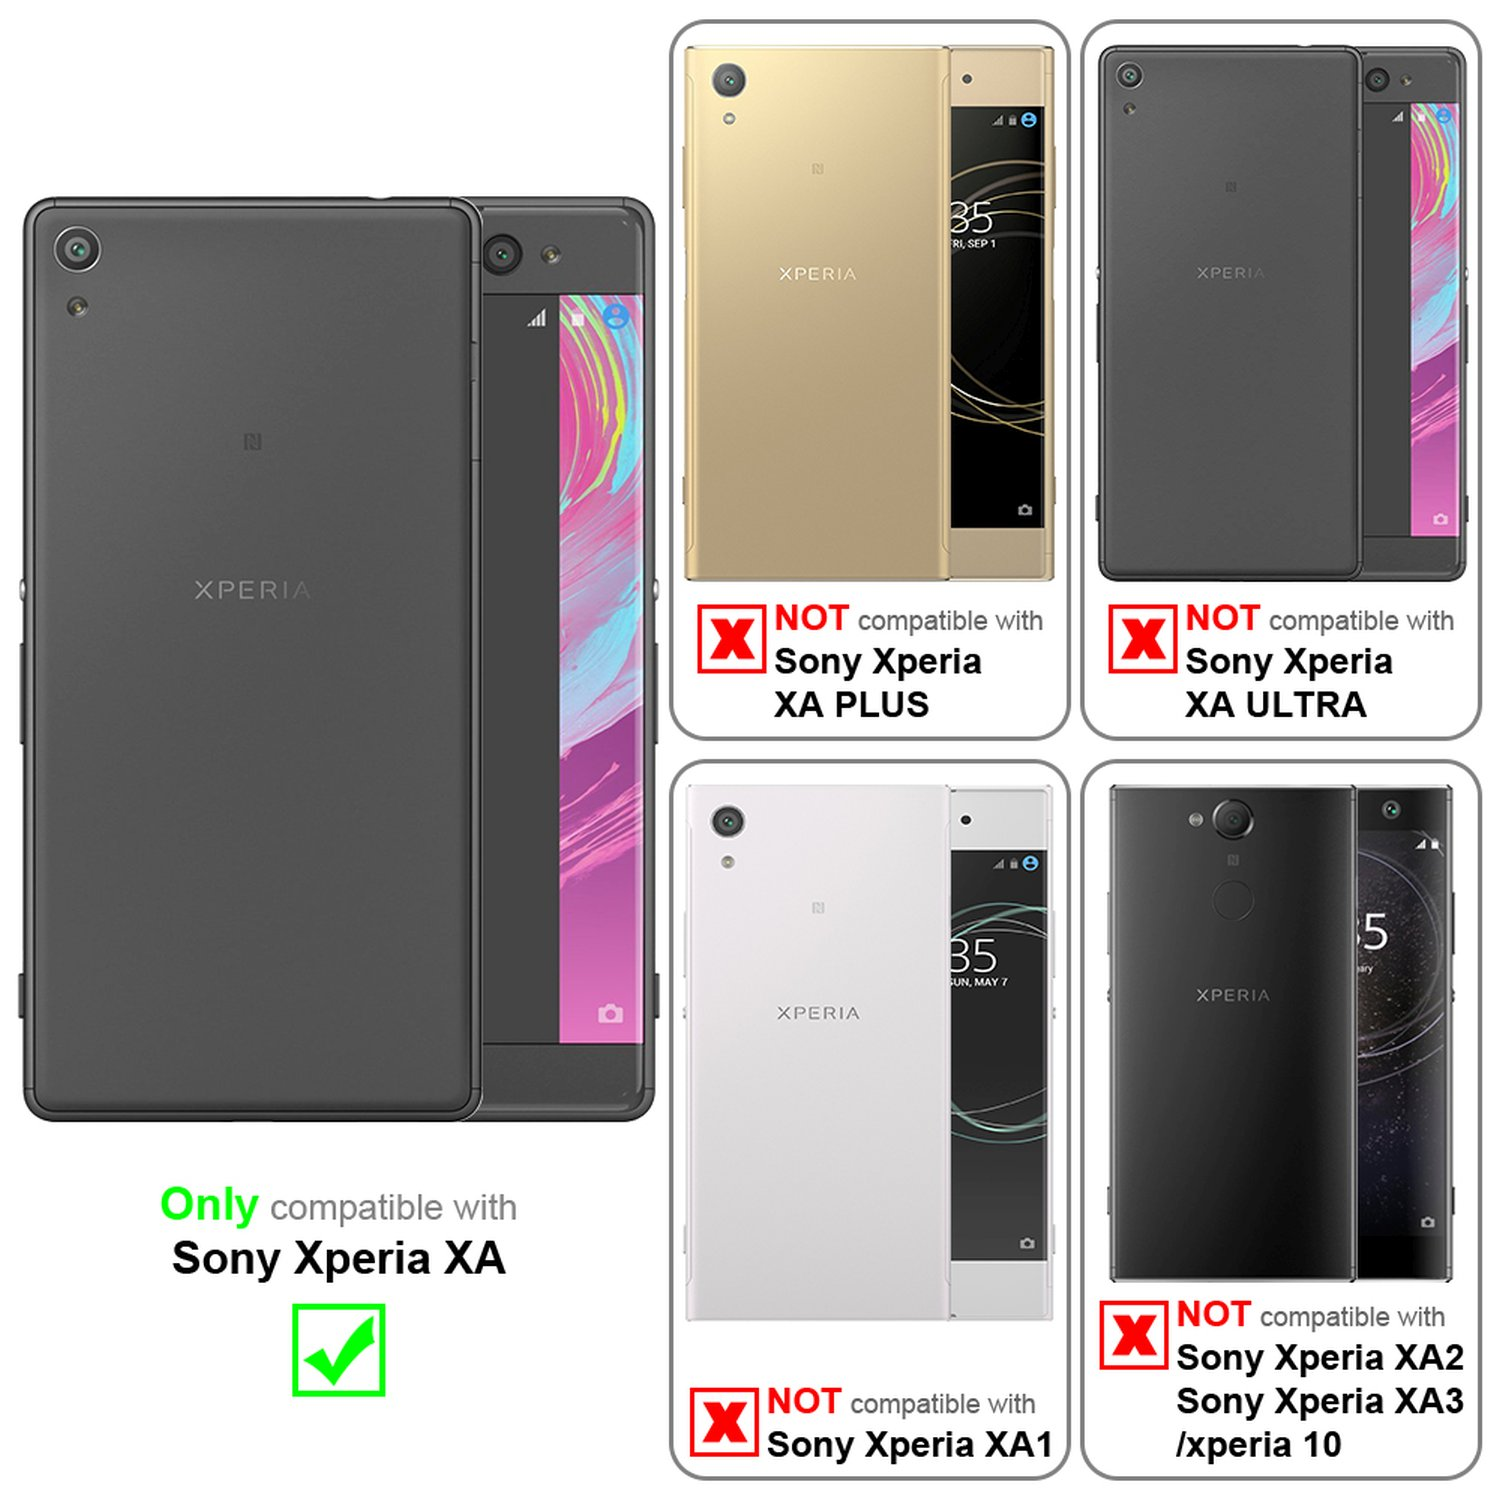 Hülle, abnehmbarer Xperia Gold Kette Sony, Handy Backcover, CADORABO Band und Ringen, CAMOUFLAGE Kordel XA, mit